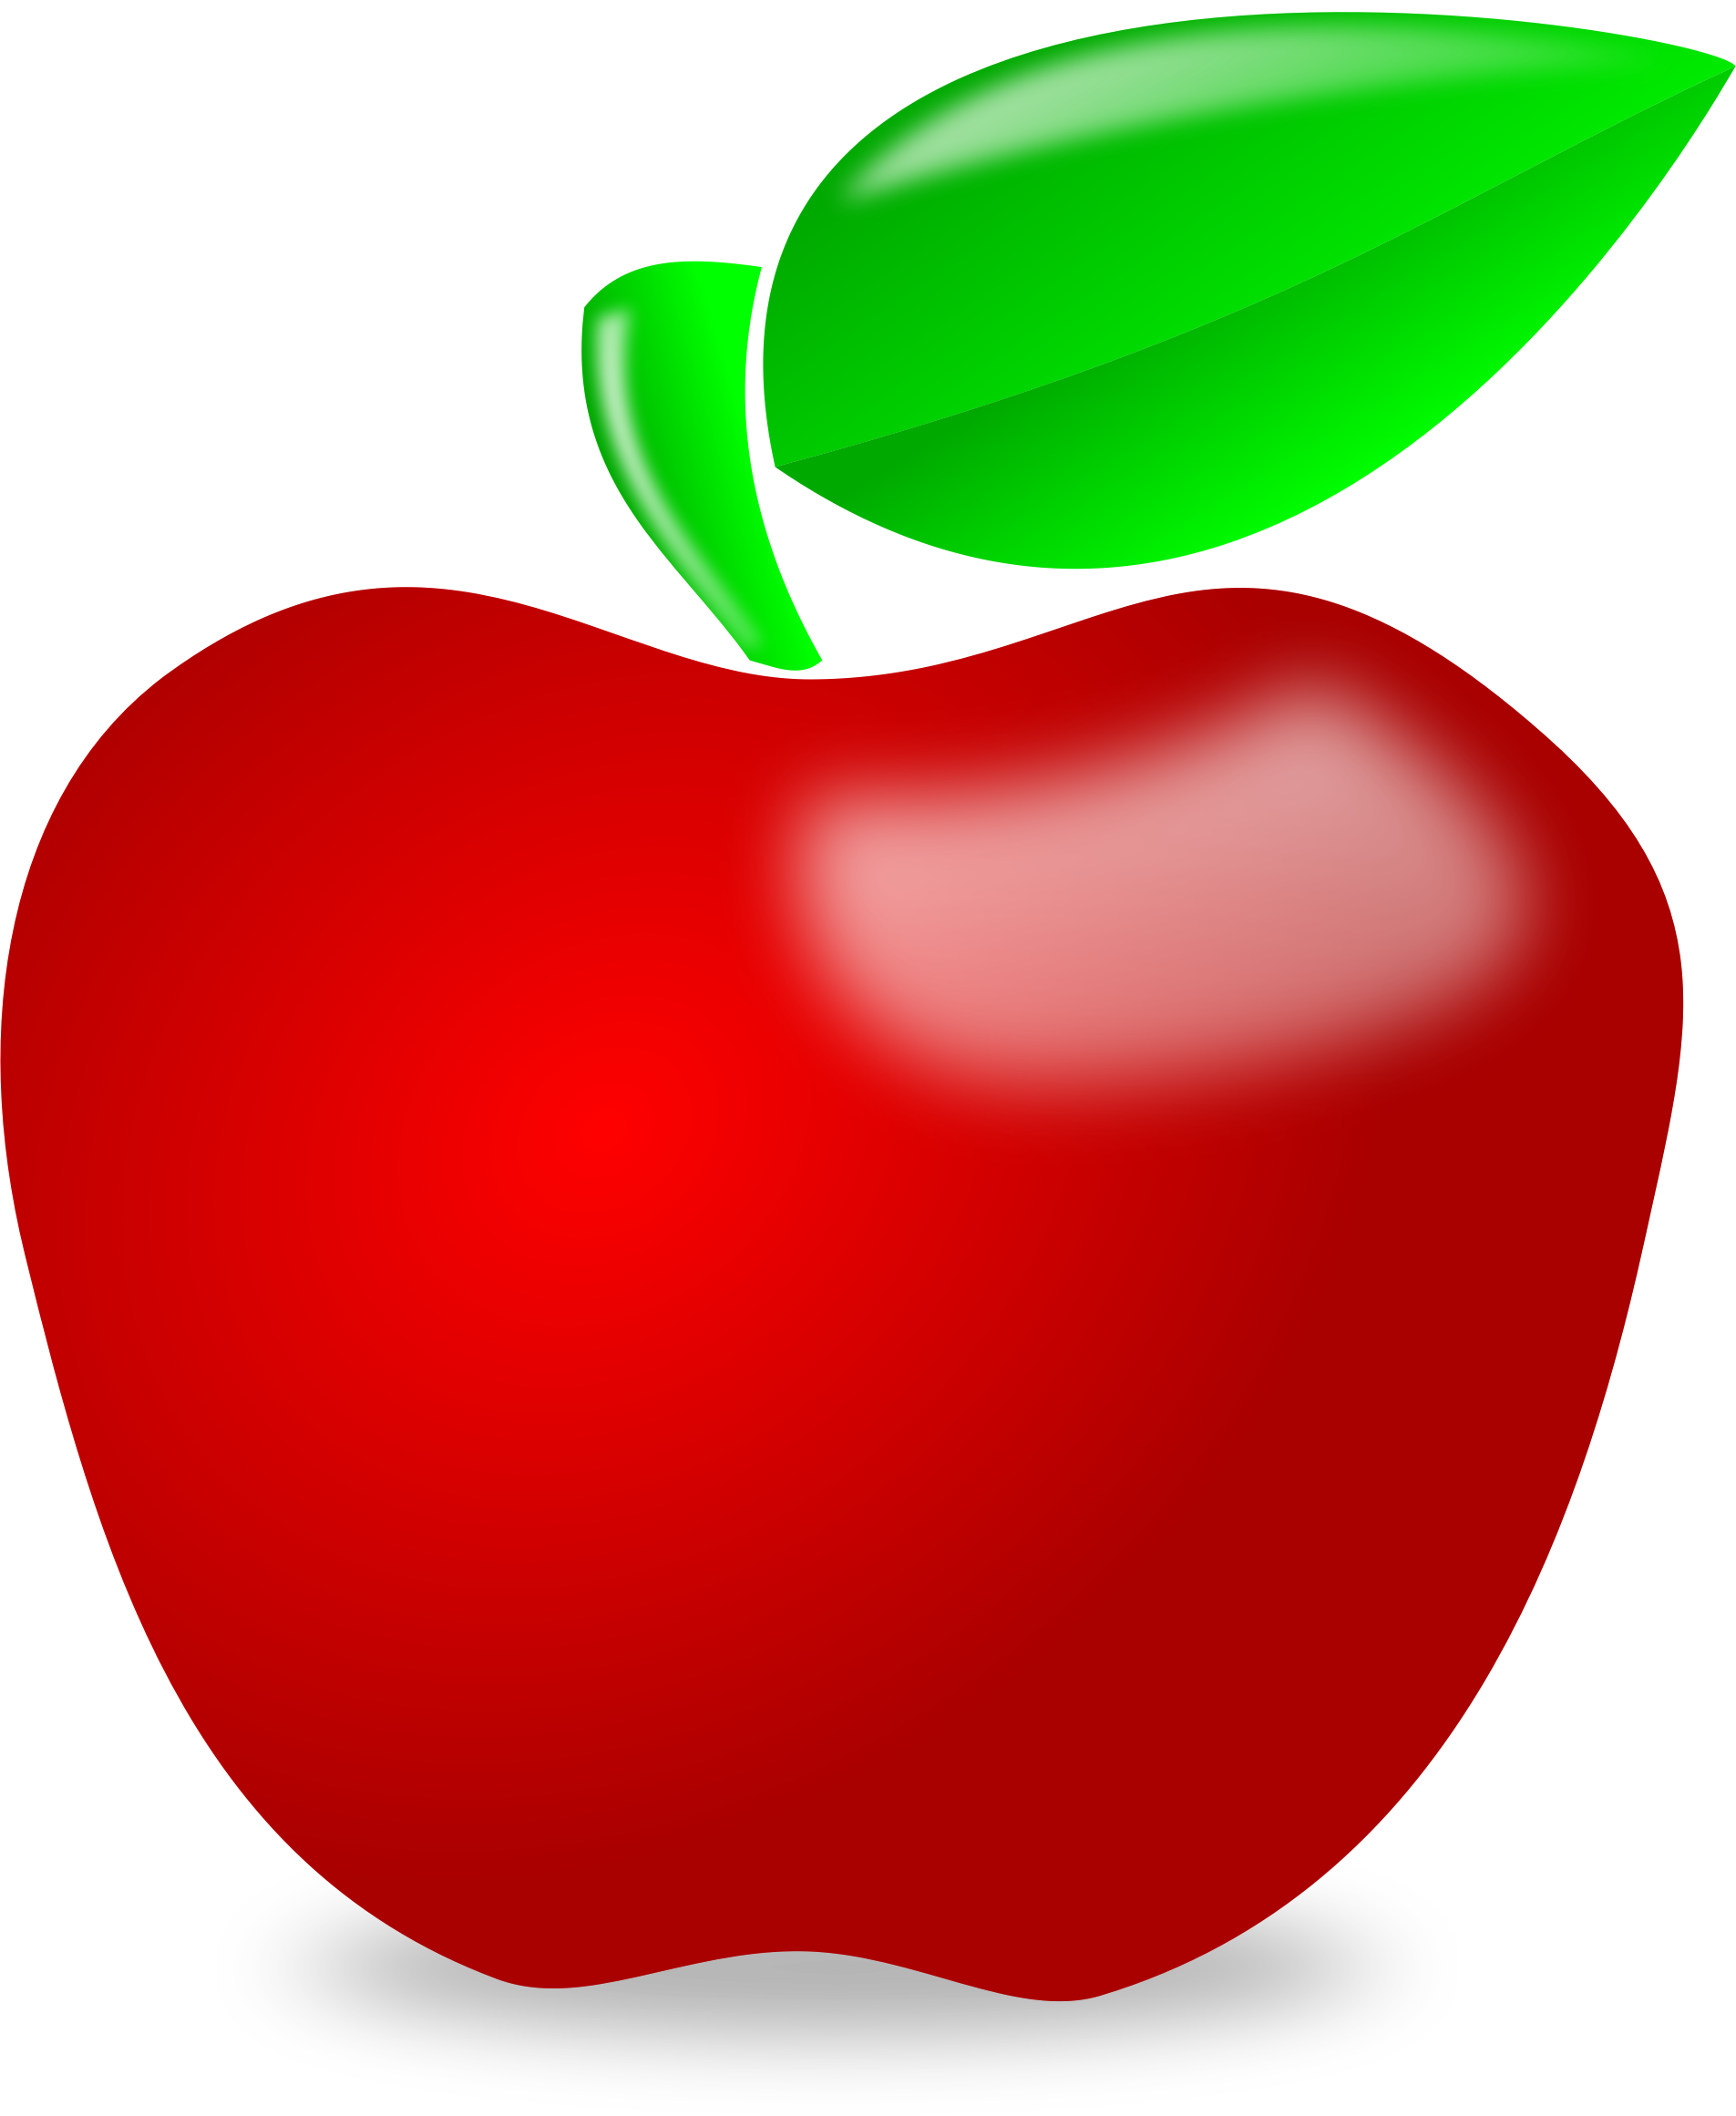 Clipart - Glossy apple